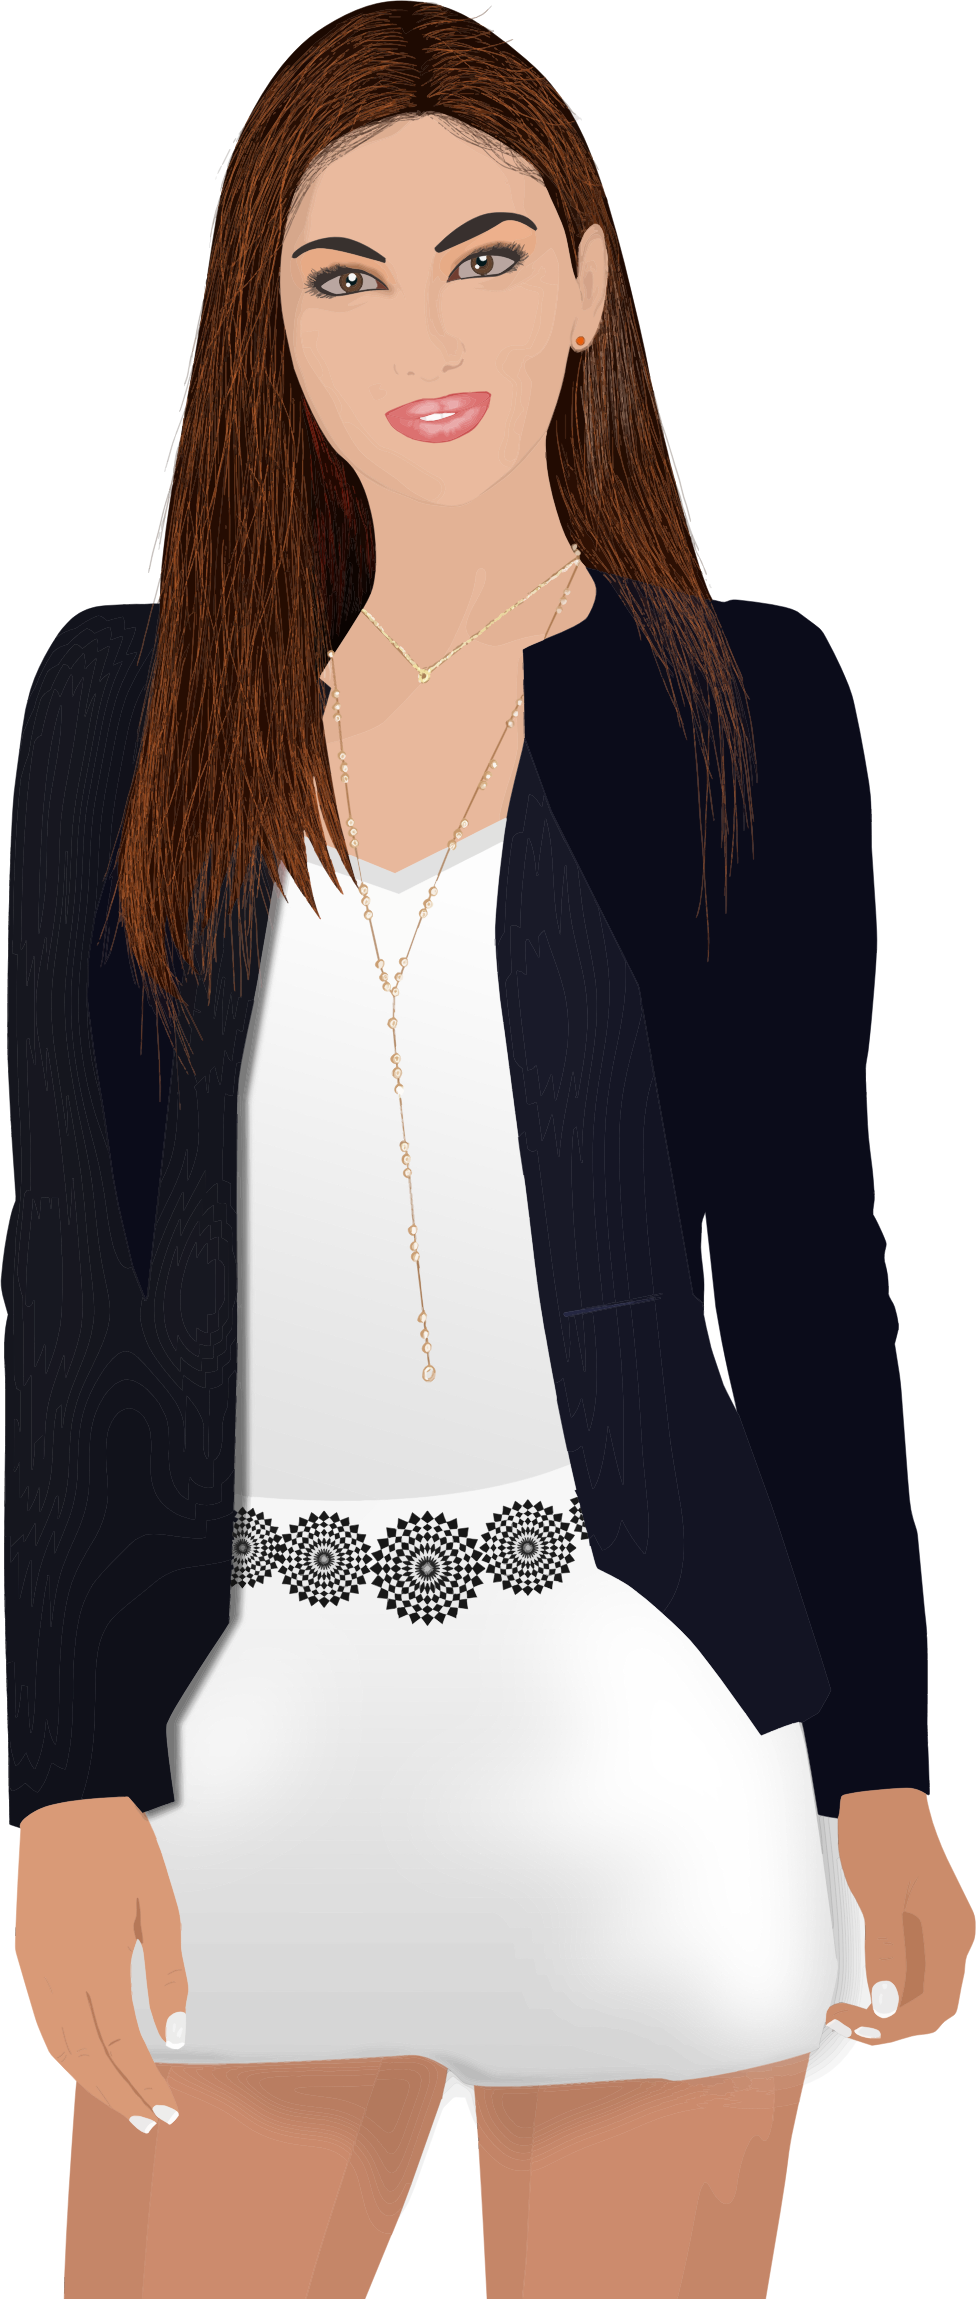 Free - Business Woman Clip Art - Png Download (976x2299), Png Download